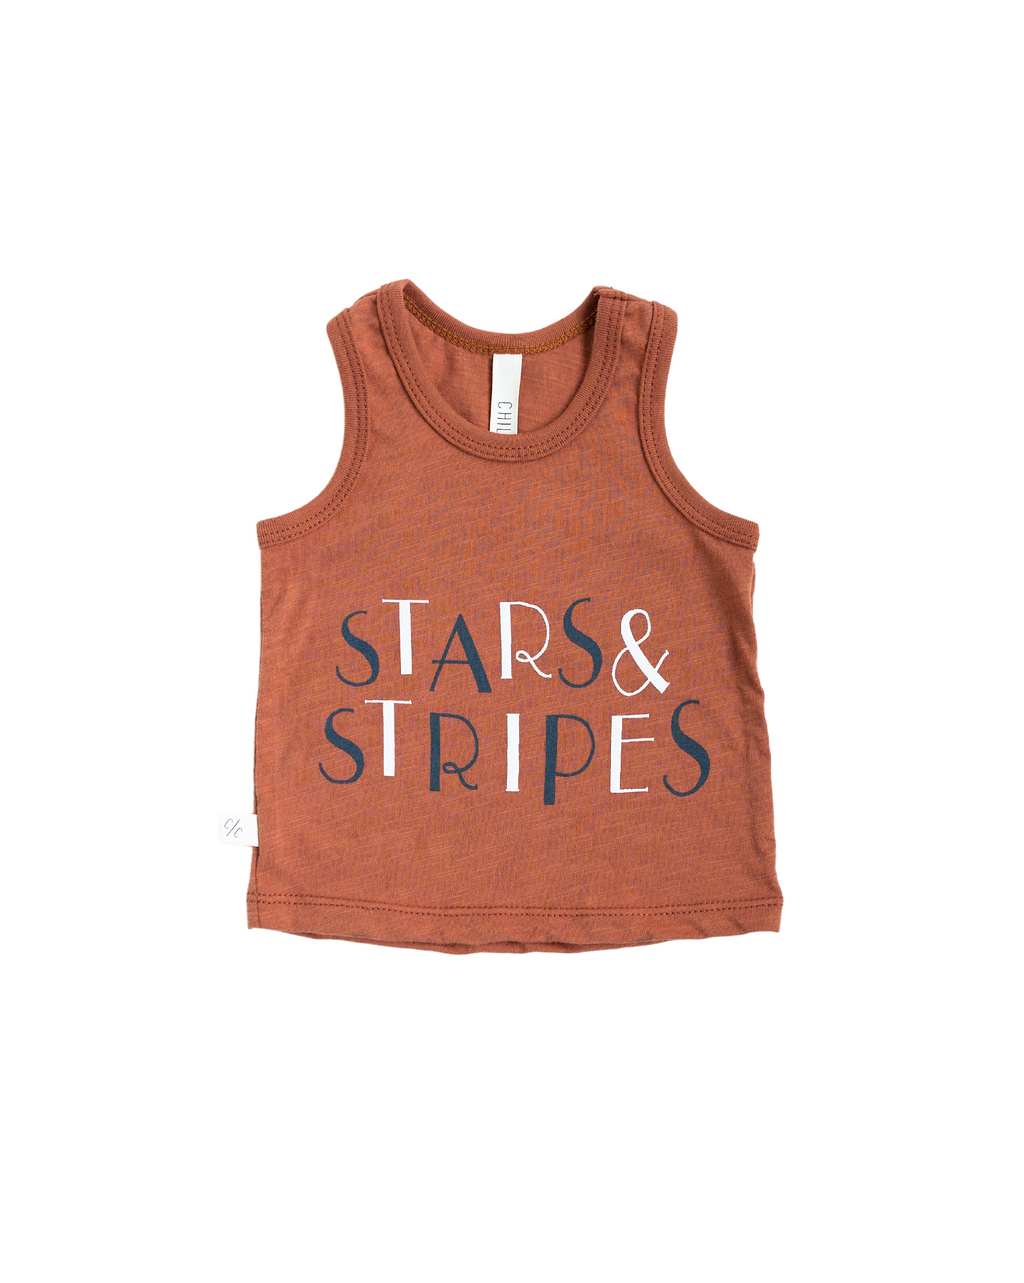 tank top - stars and stripes on red rock